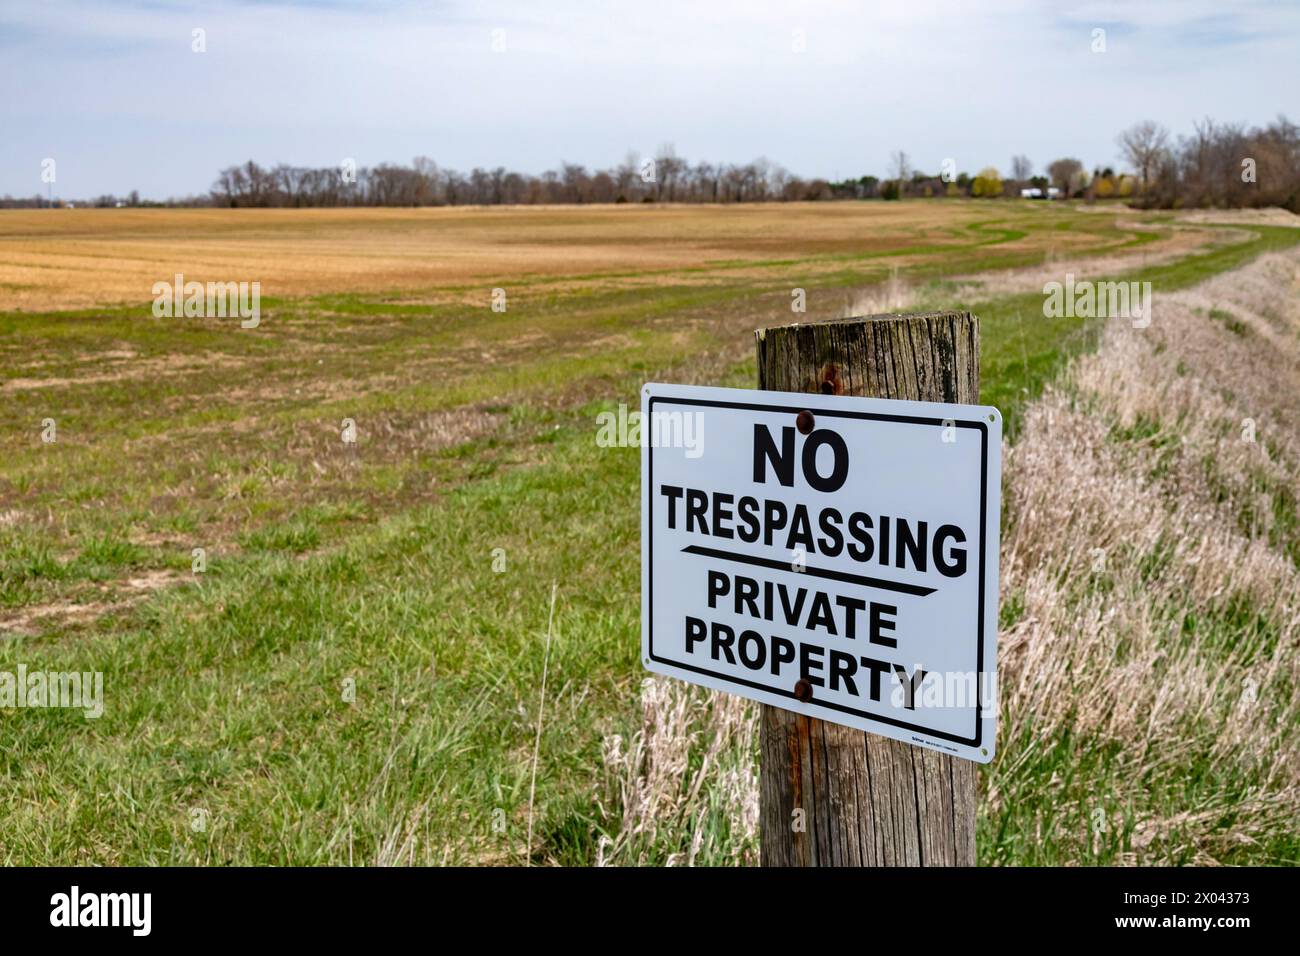 Van Wert, Ohio - A 'No Trespassing' sign protects a farm field in rural Northwestern Ohio. Stock Photo